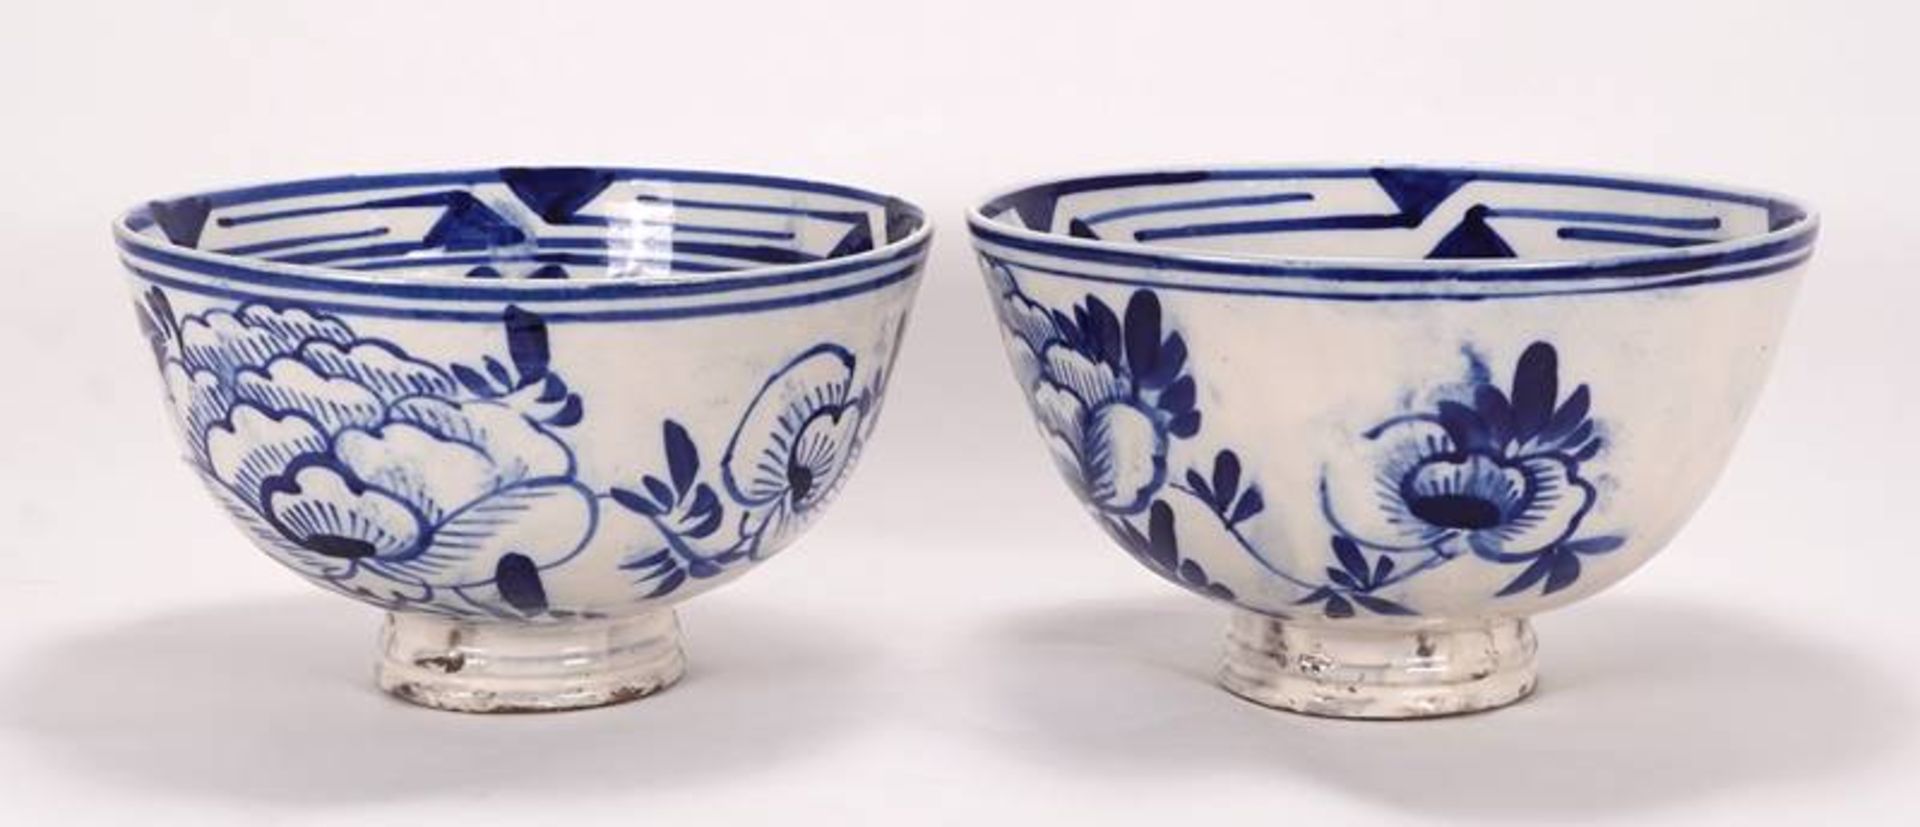 Pair of large bowls - Image 2 of 4